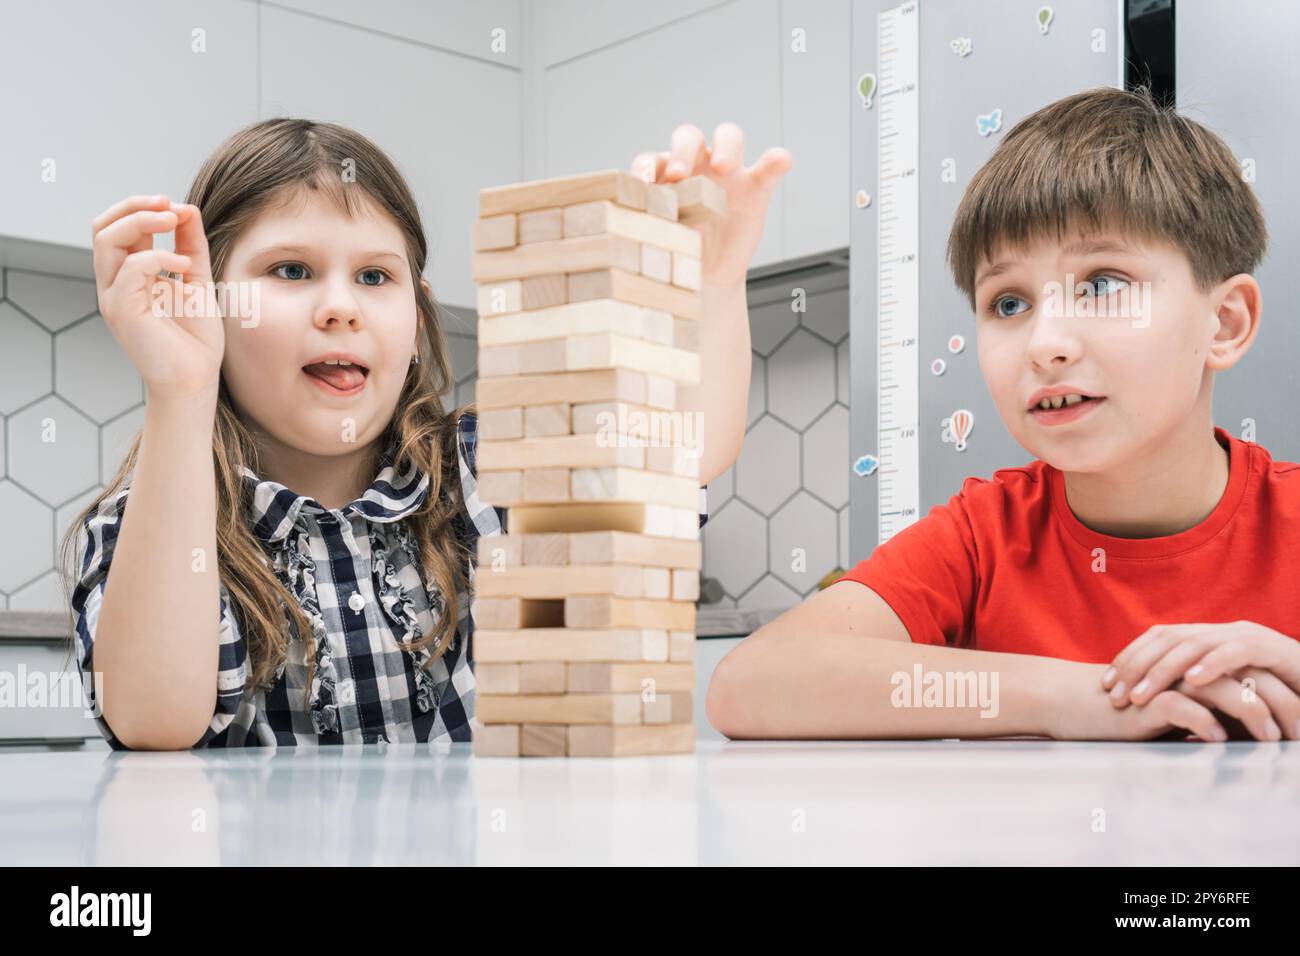 Kids play jenga sitting at table. Boy and girl with concentrated facial expression build tower from wooden blocks. Stock Photo